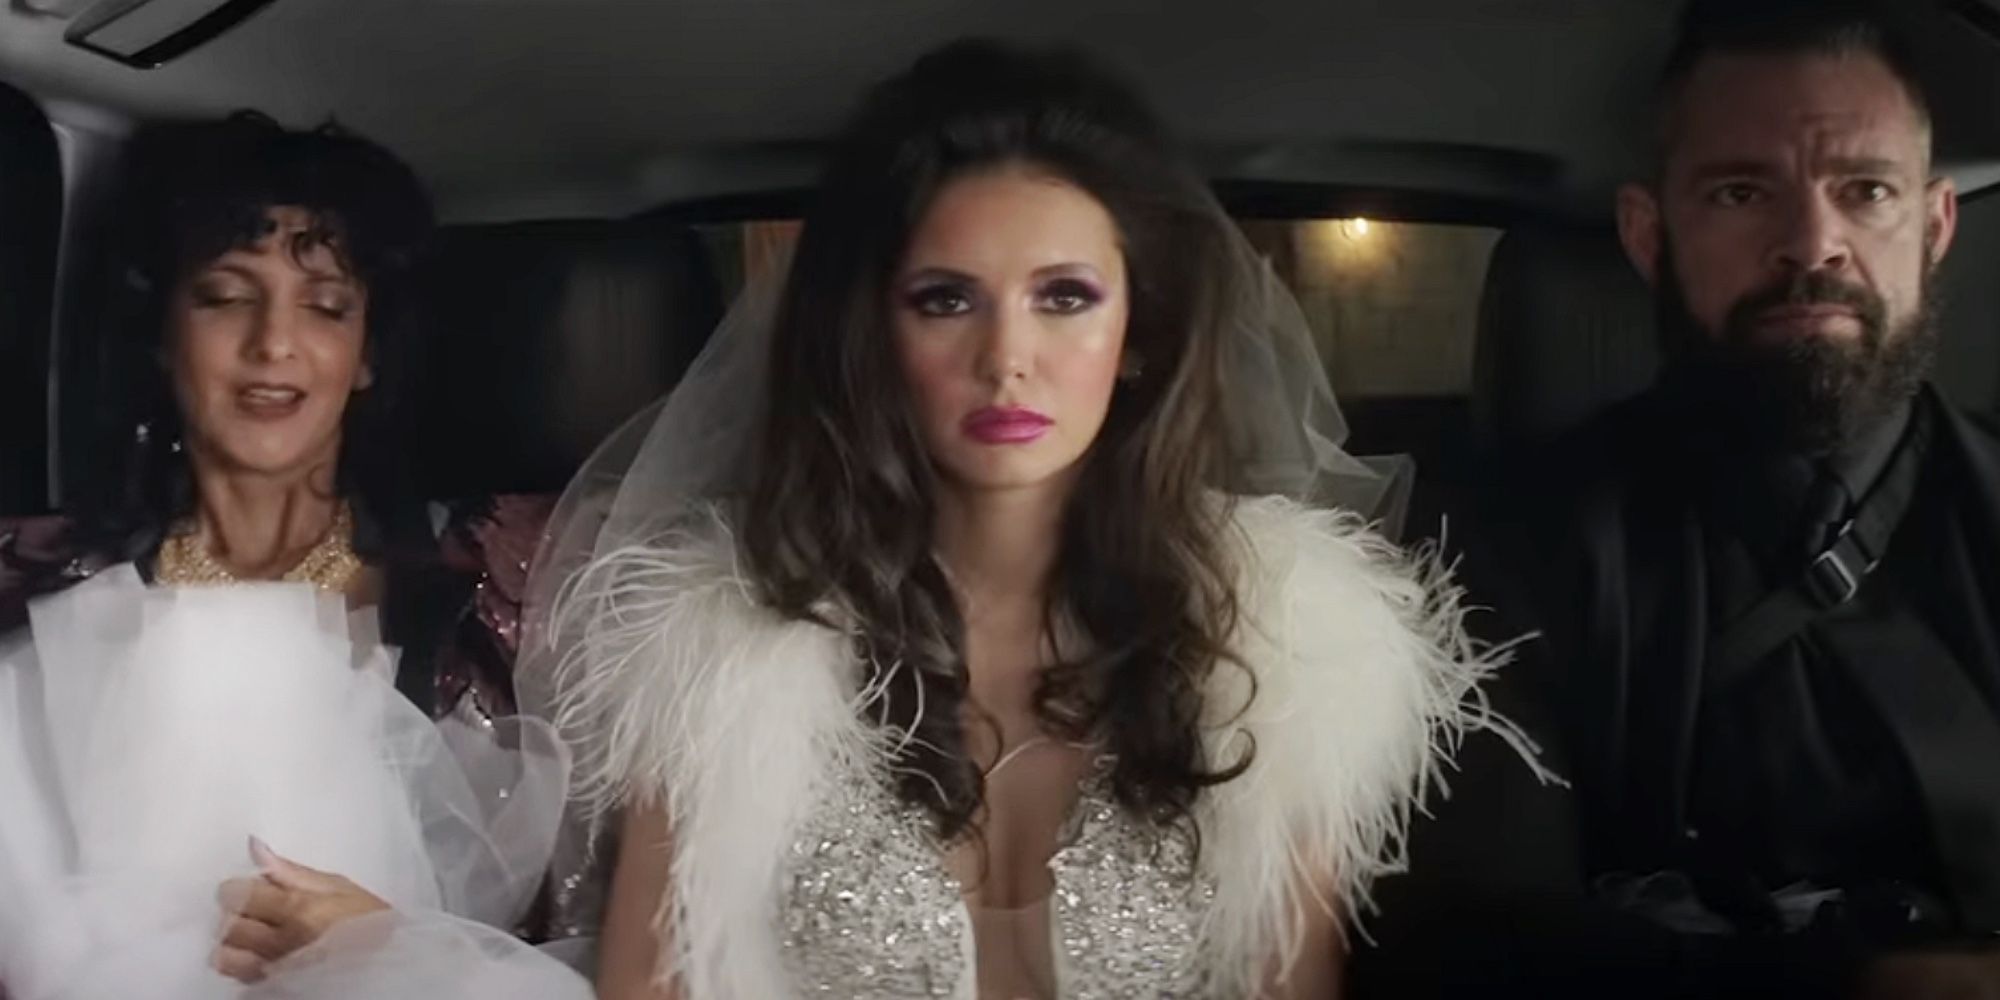 The Out-Laws: Parker in a wedding dress being held hostage by Rehan and her henchmen, sitting in a car